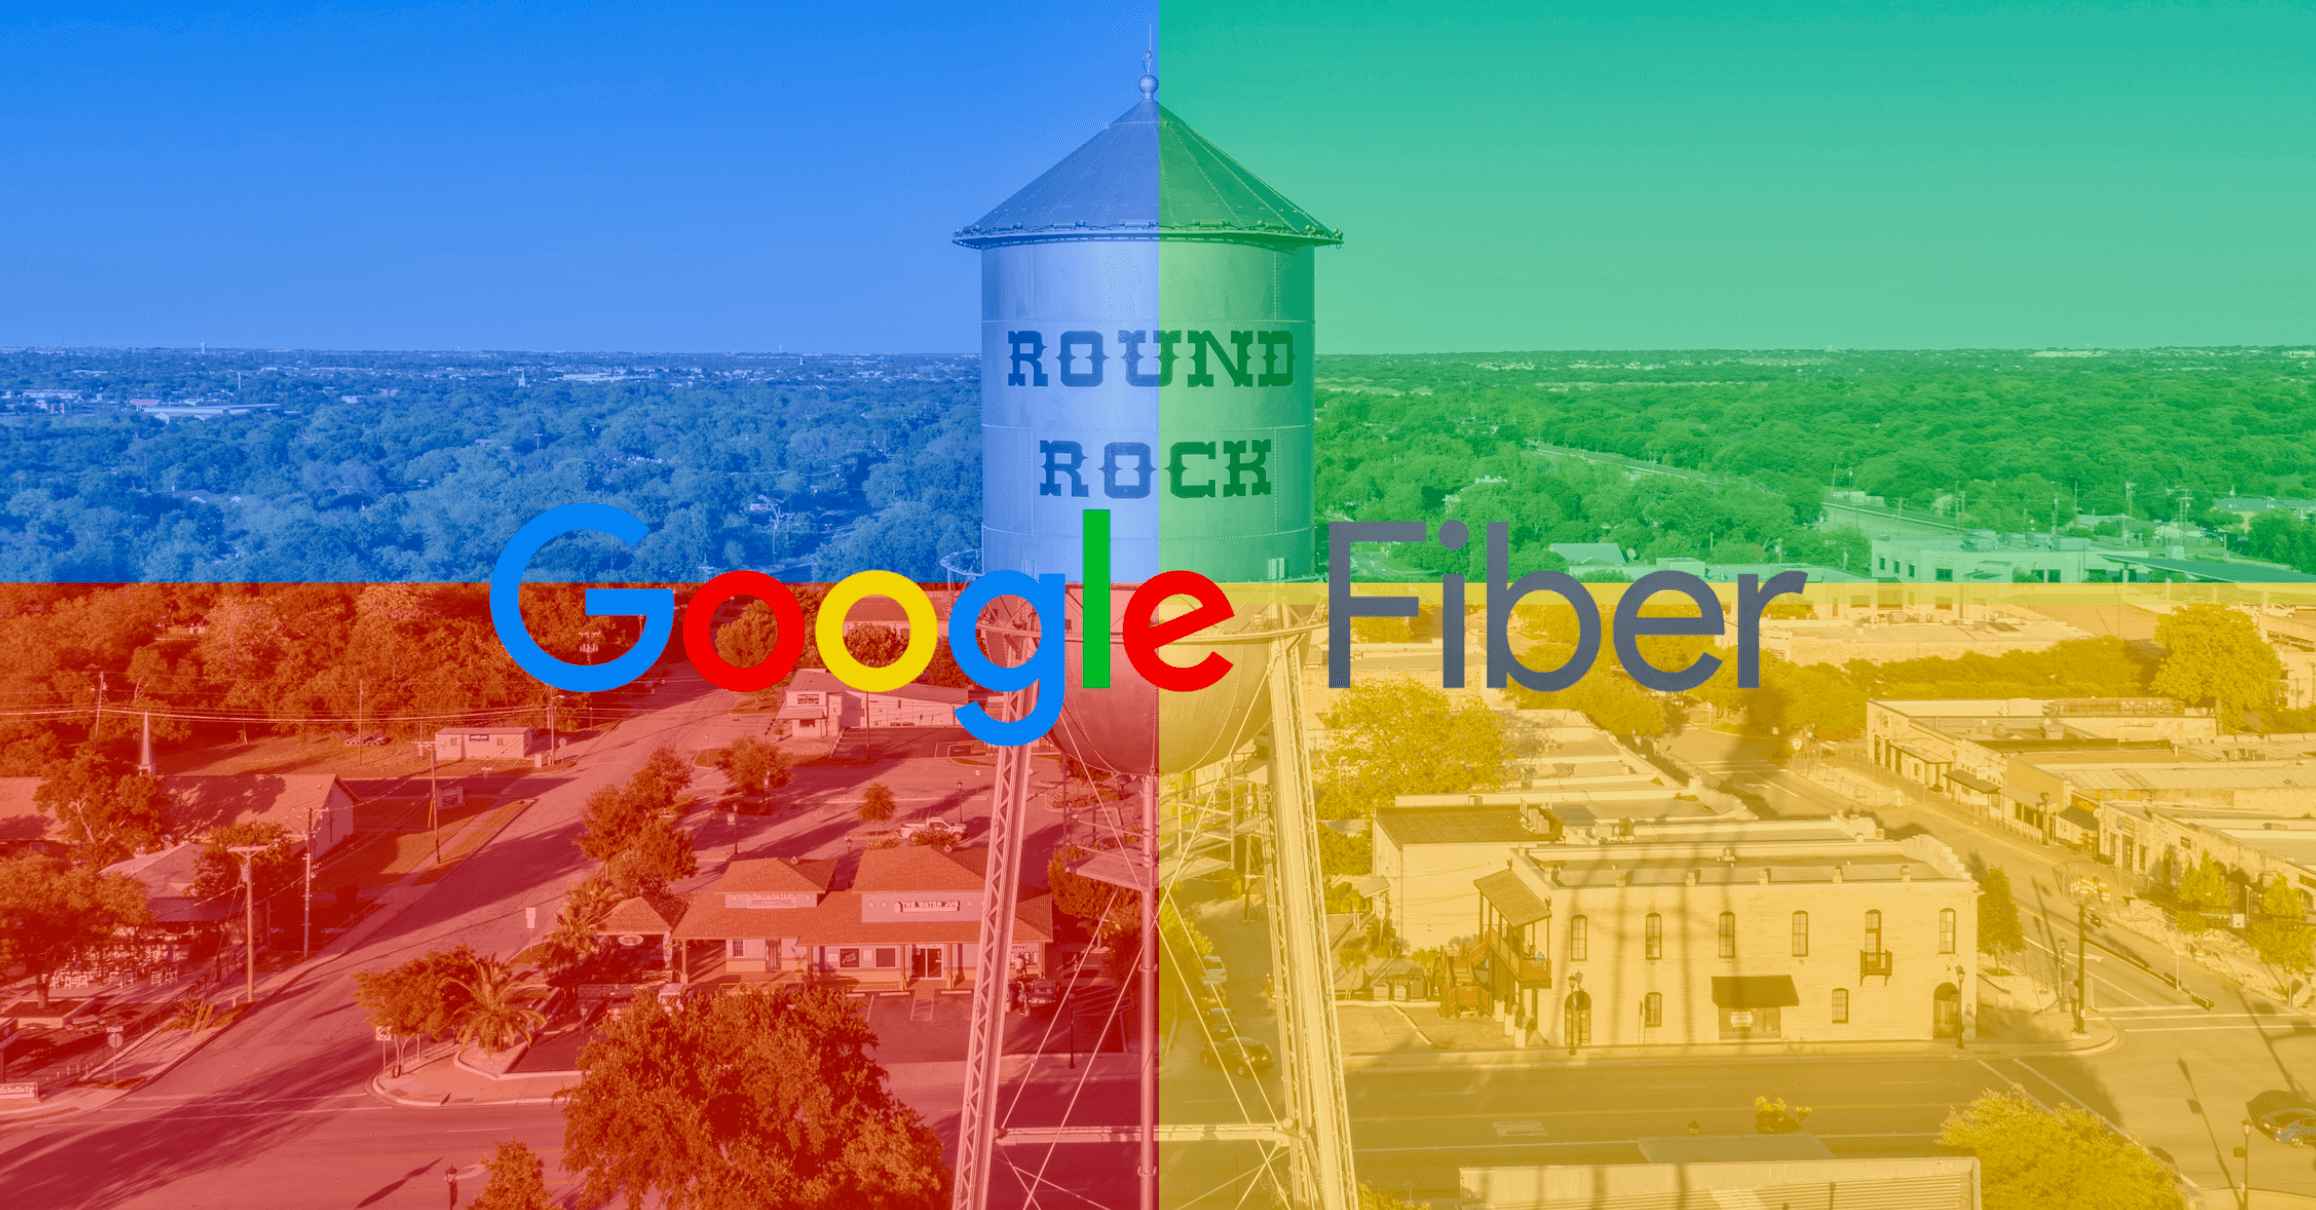 Google Fiber plans to expand to Round Rock